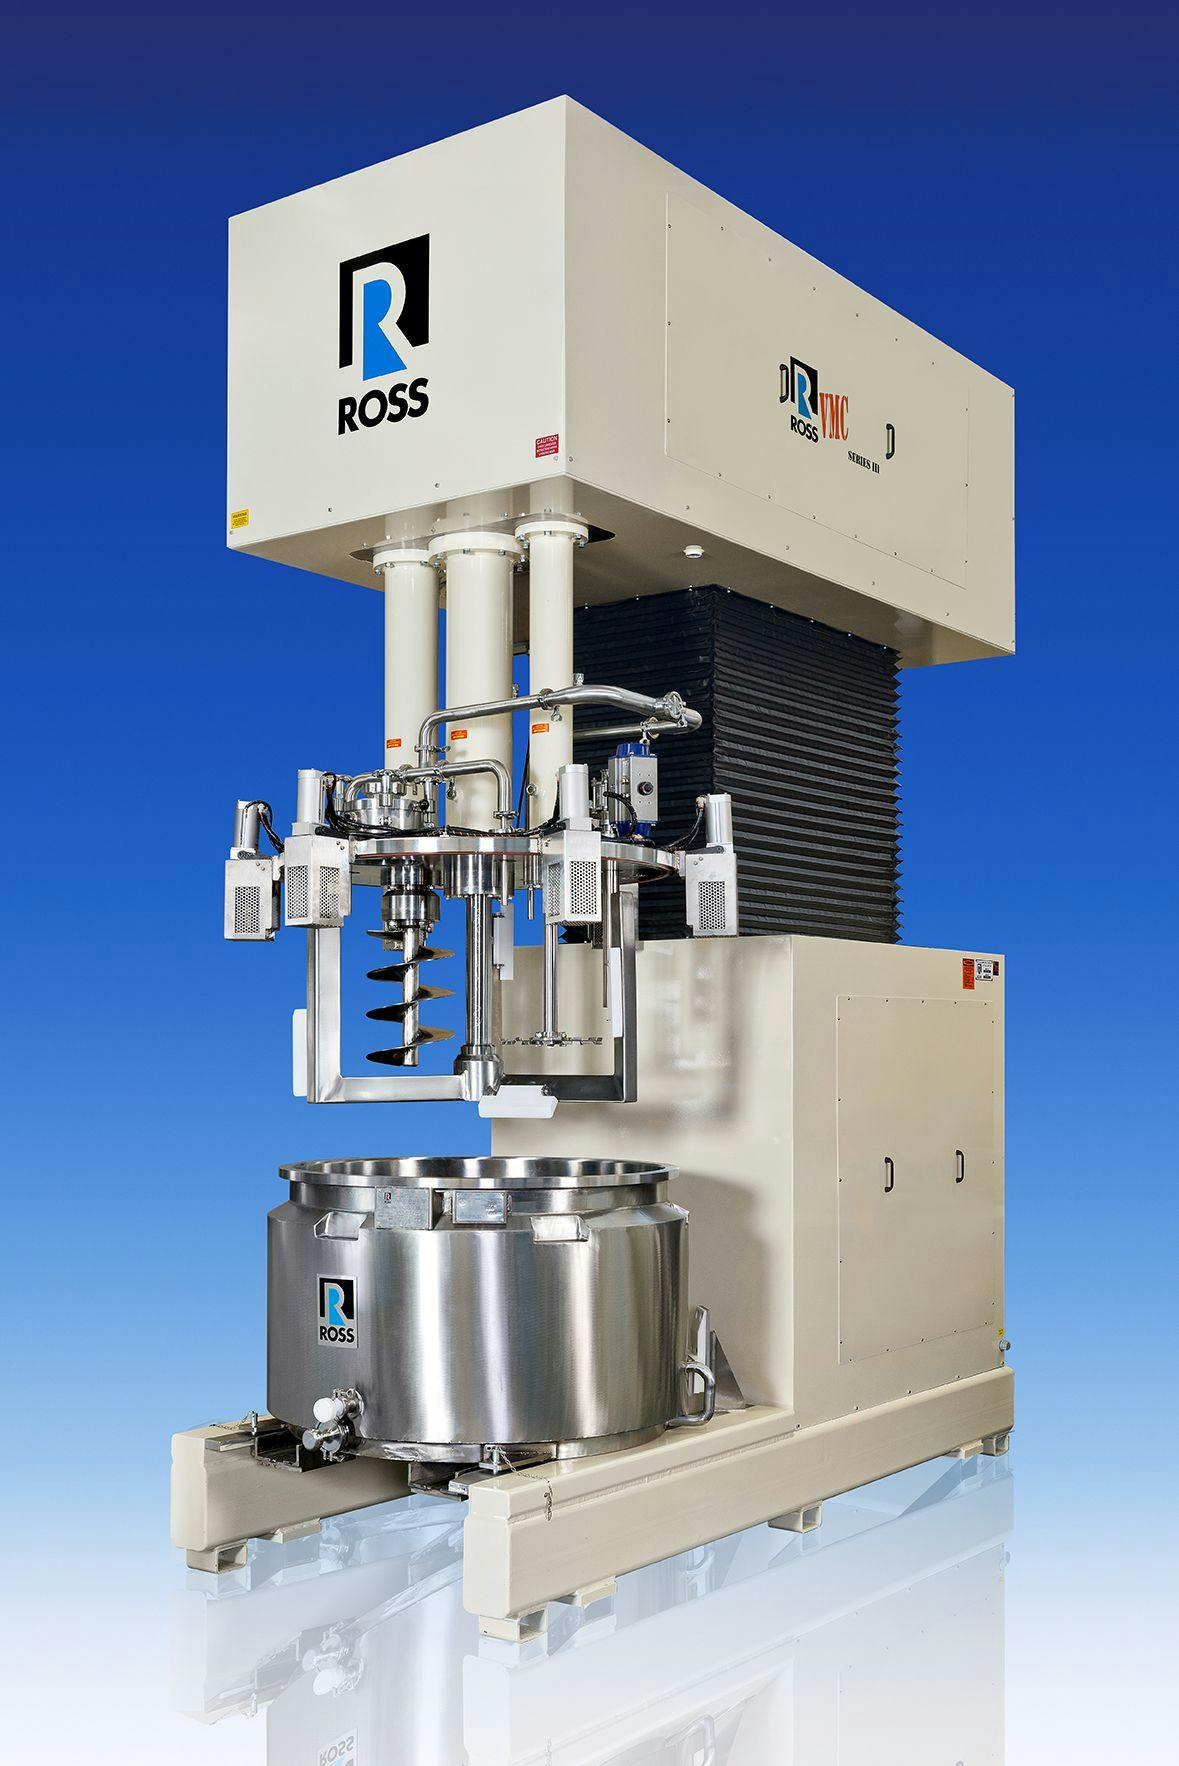 Charles Ross custom multi-shaft mixer offers enhanced locking features and more